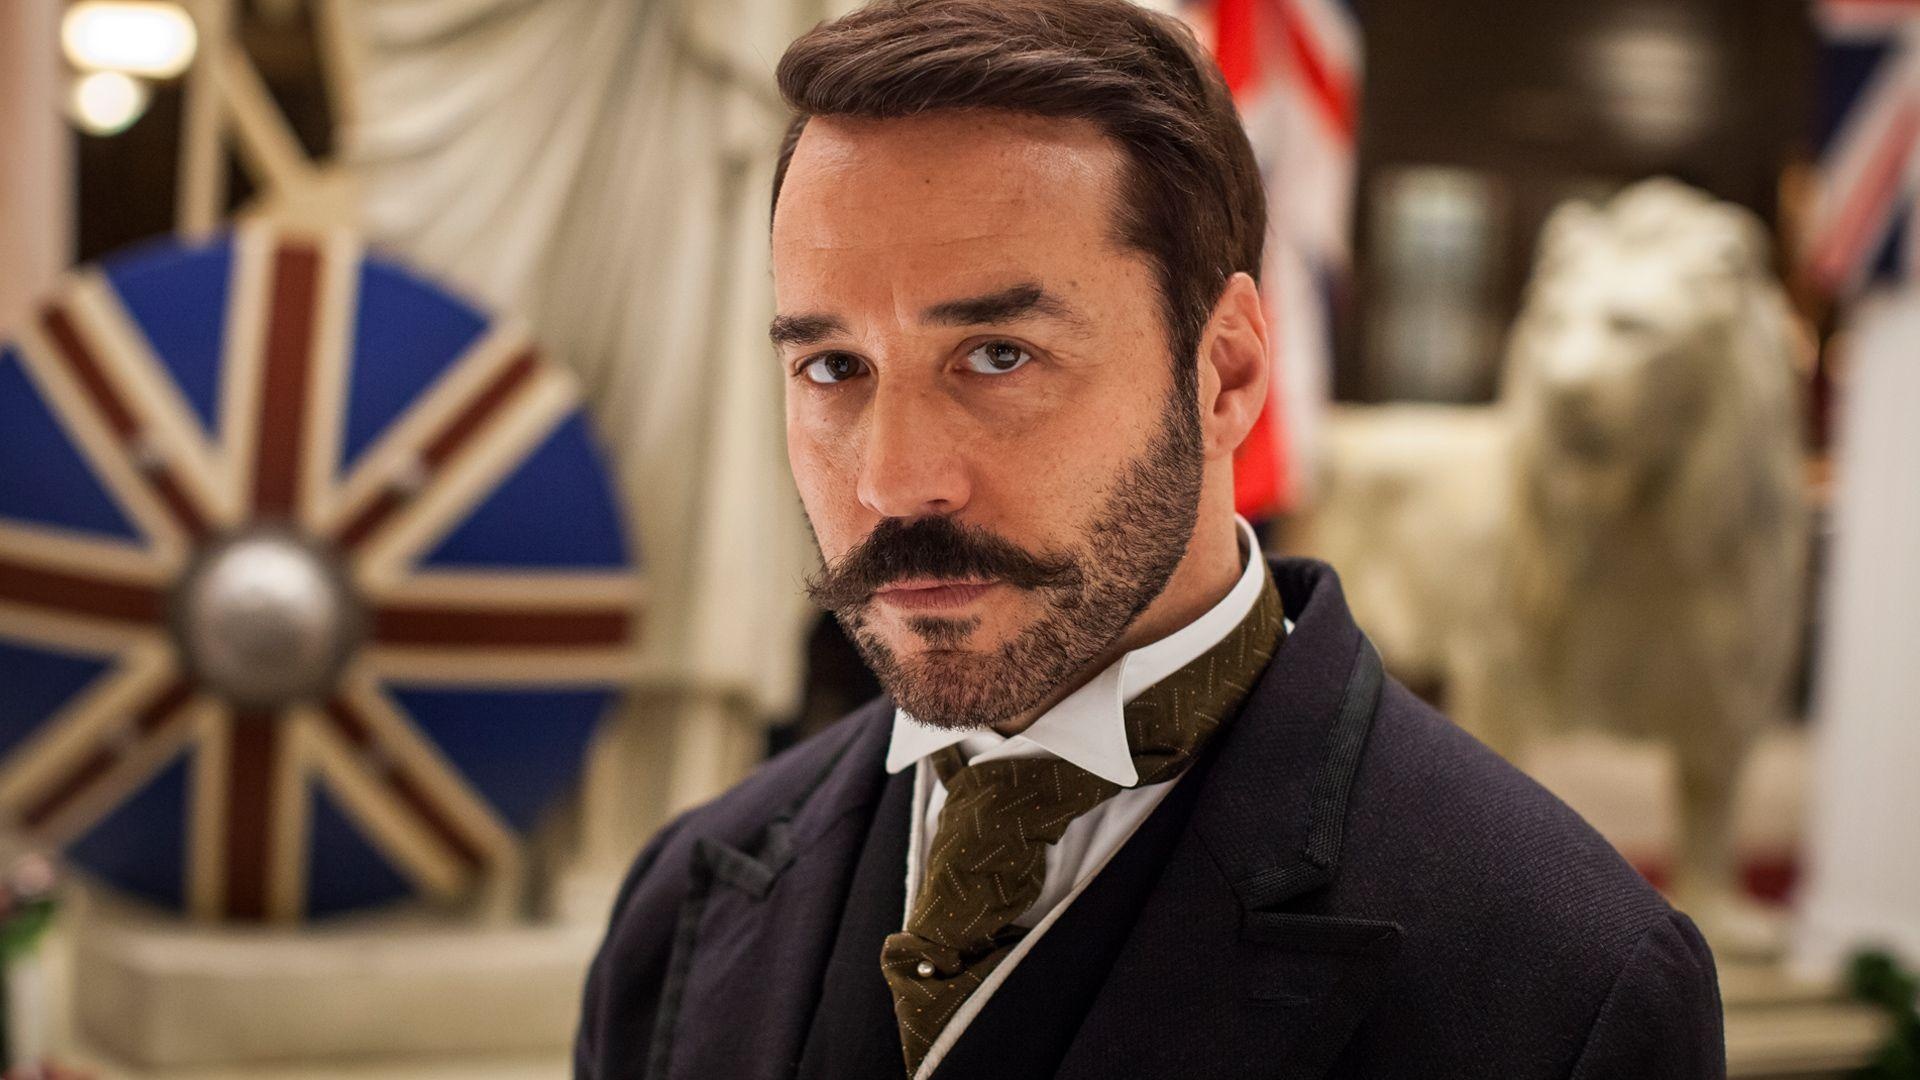 Jeremy Piven: Harry Gordon Selfridge, TV series co-produced by ITV Studios and Masterpiece, An American actor and producer. 1920x1080 Full HD Wallpaper.